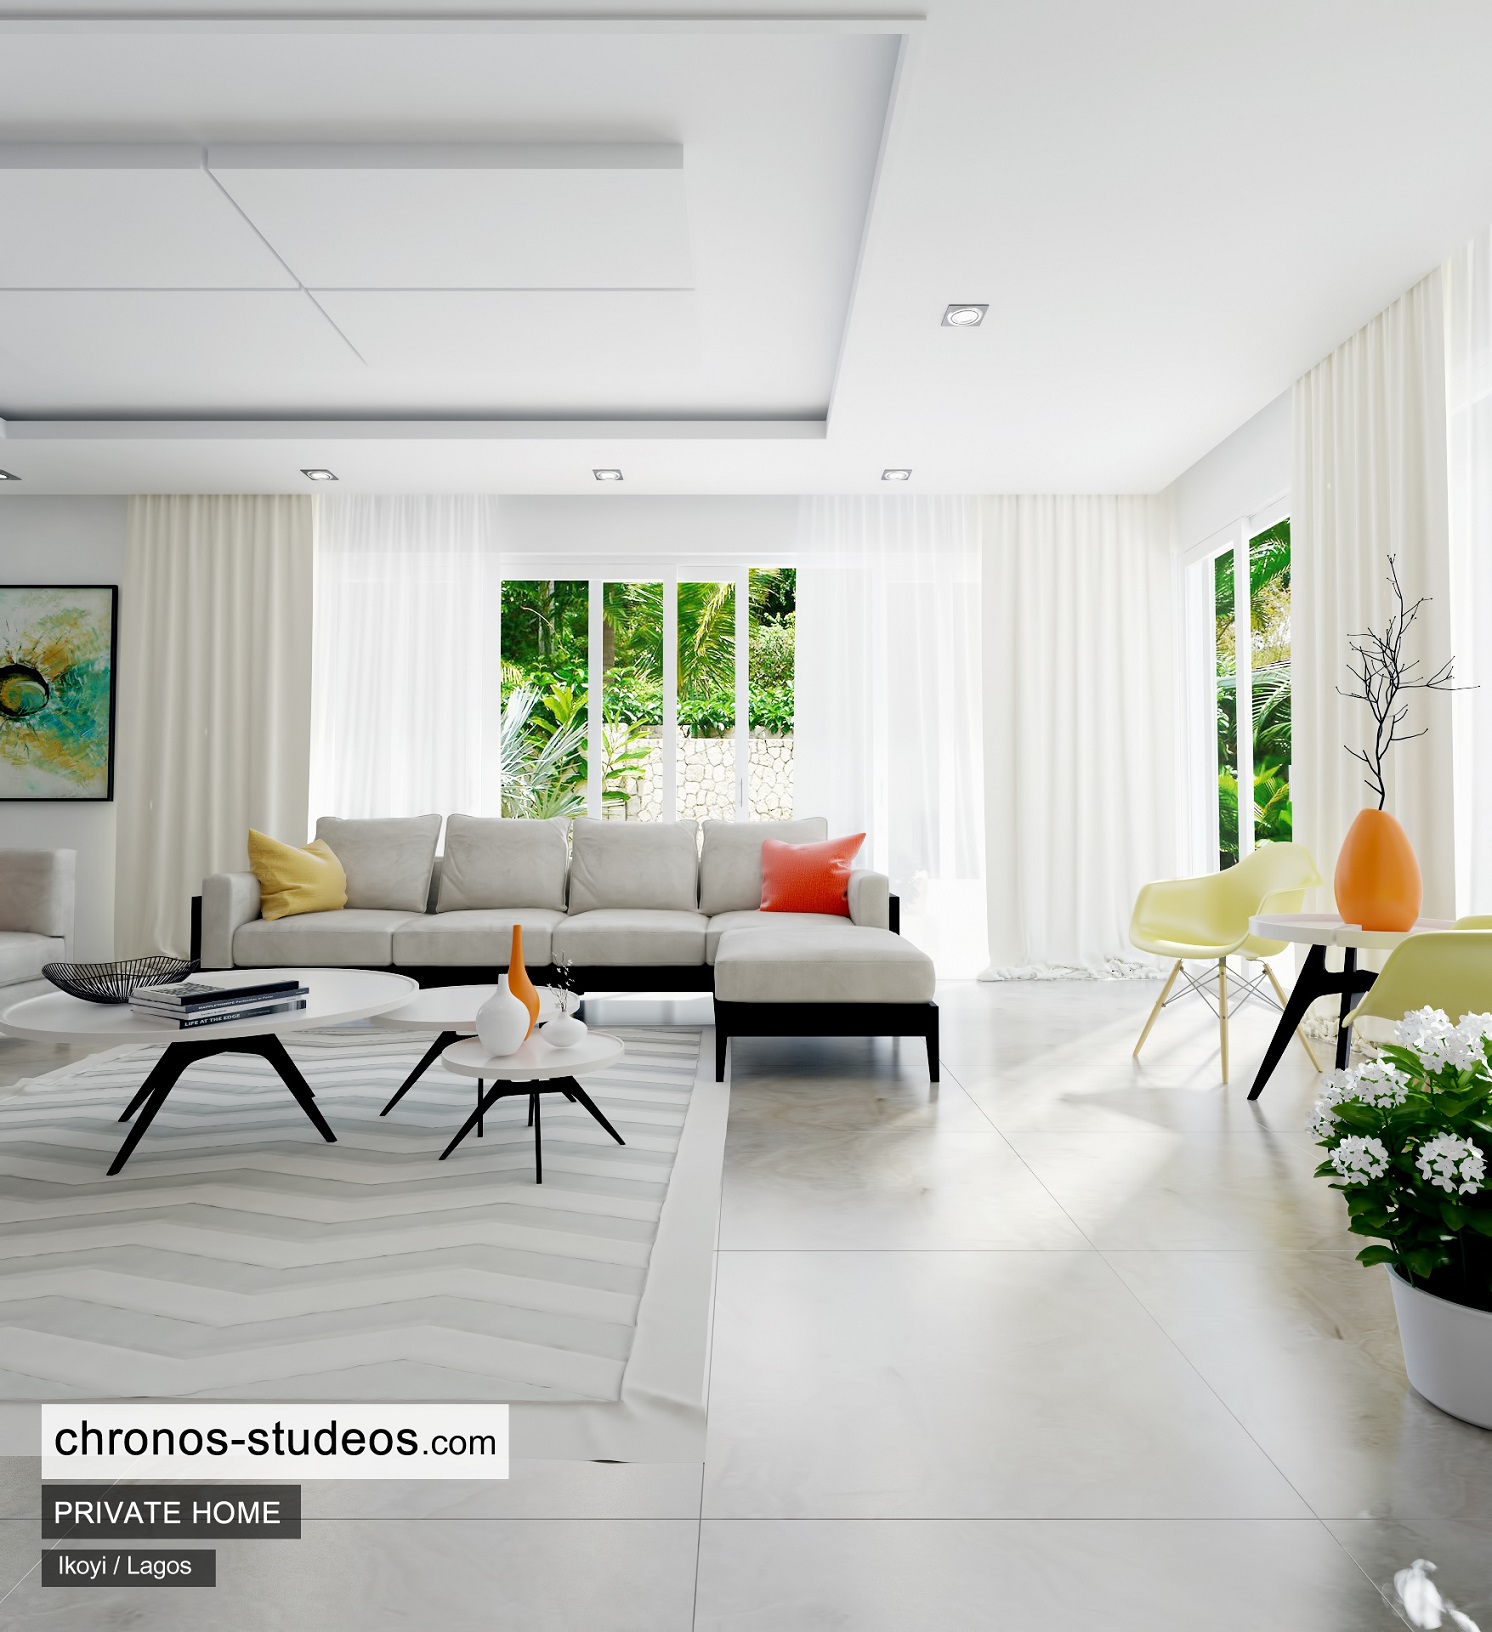 Living room design by chronos studeos architects 2